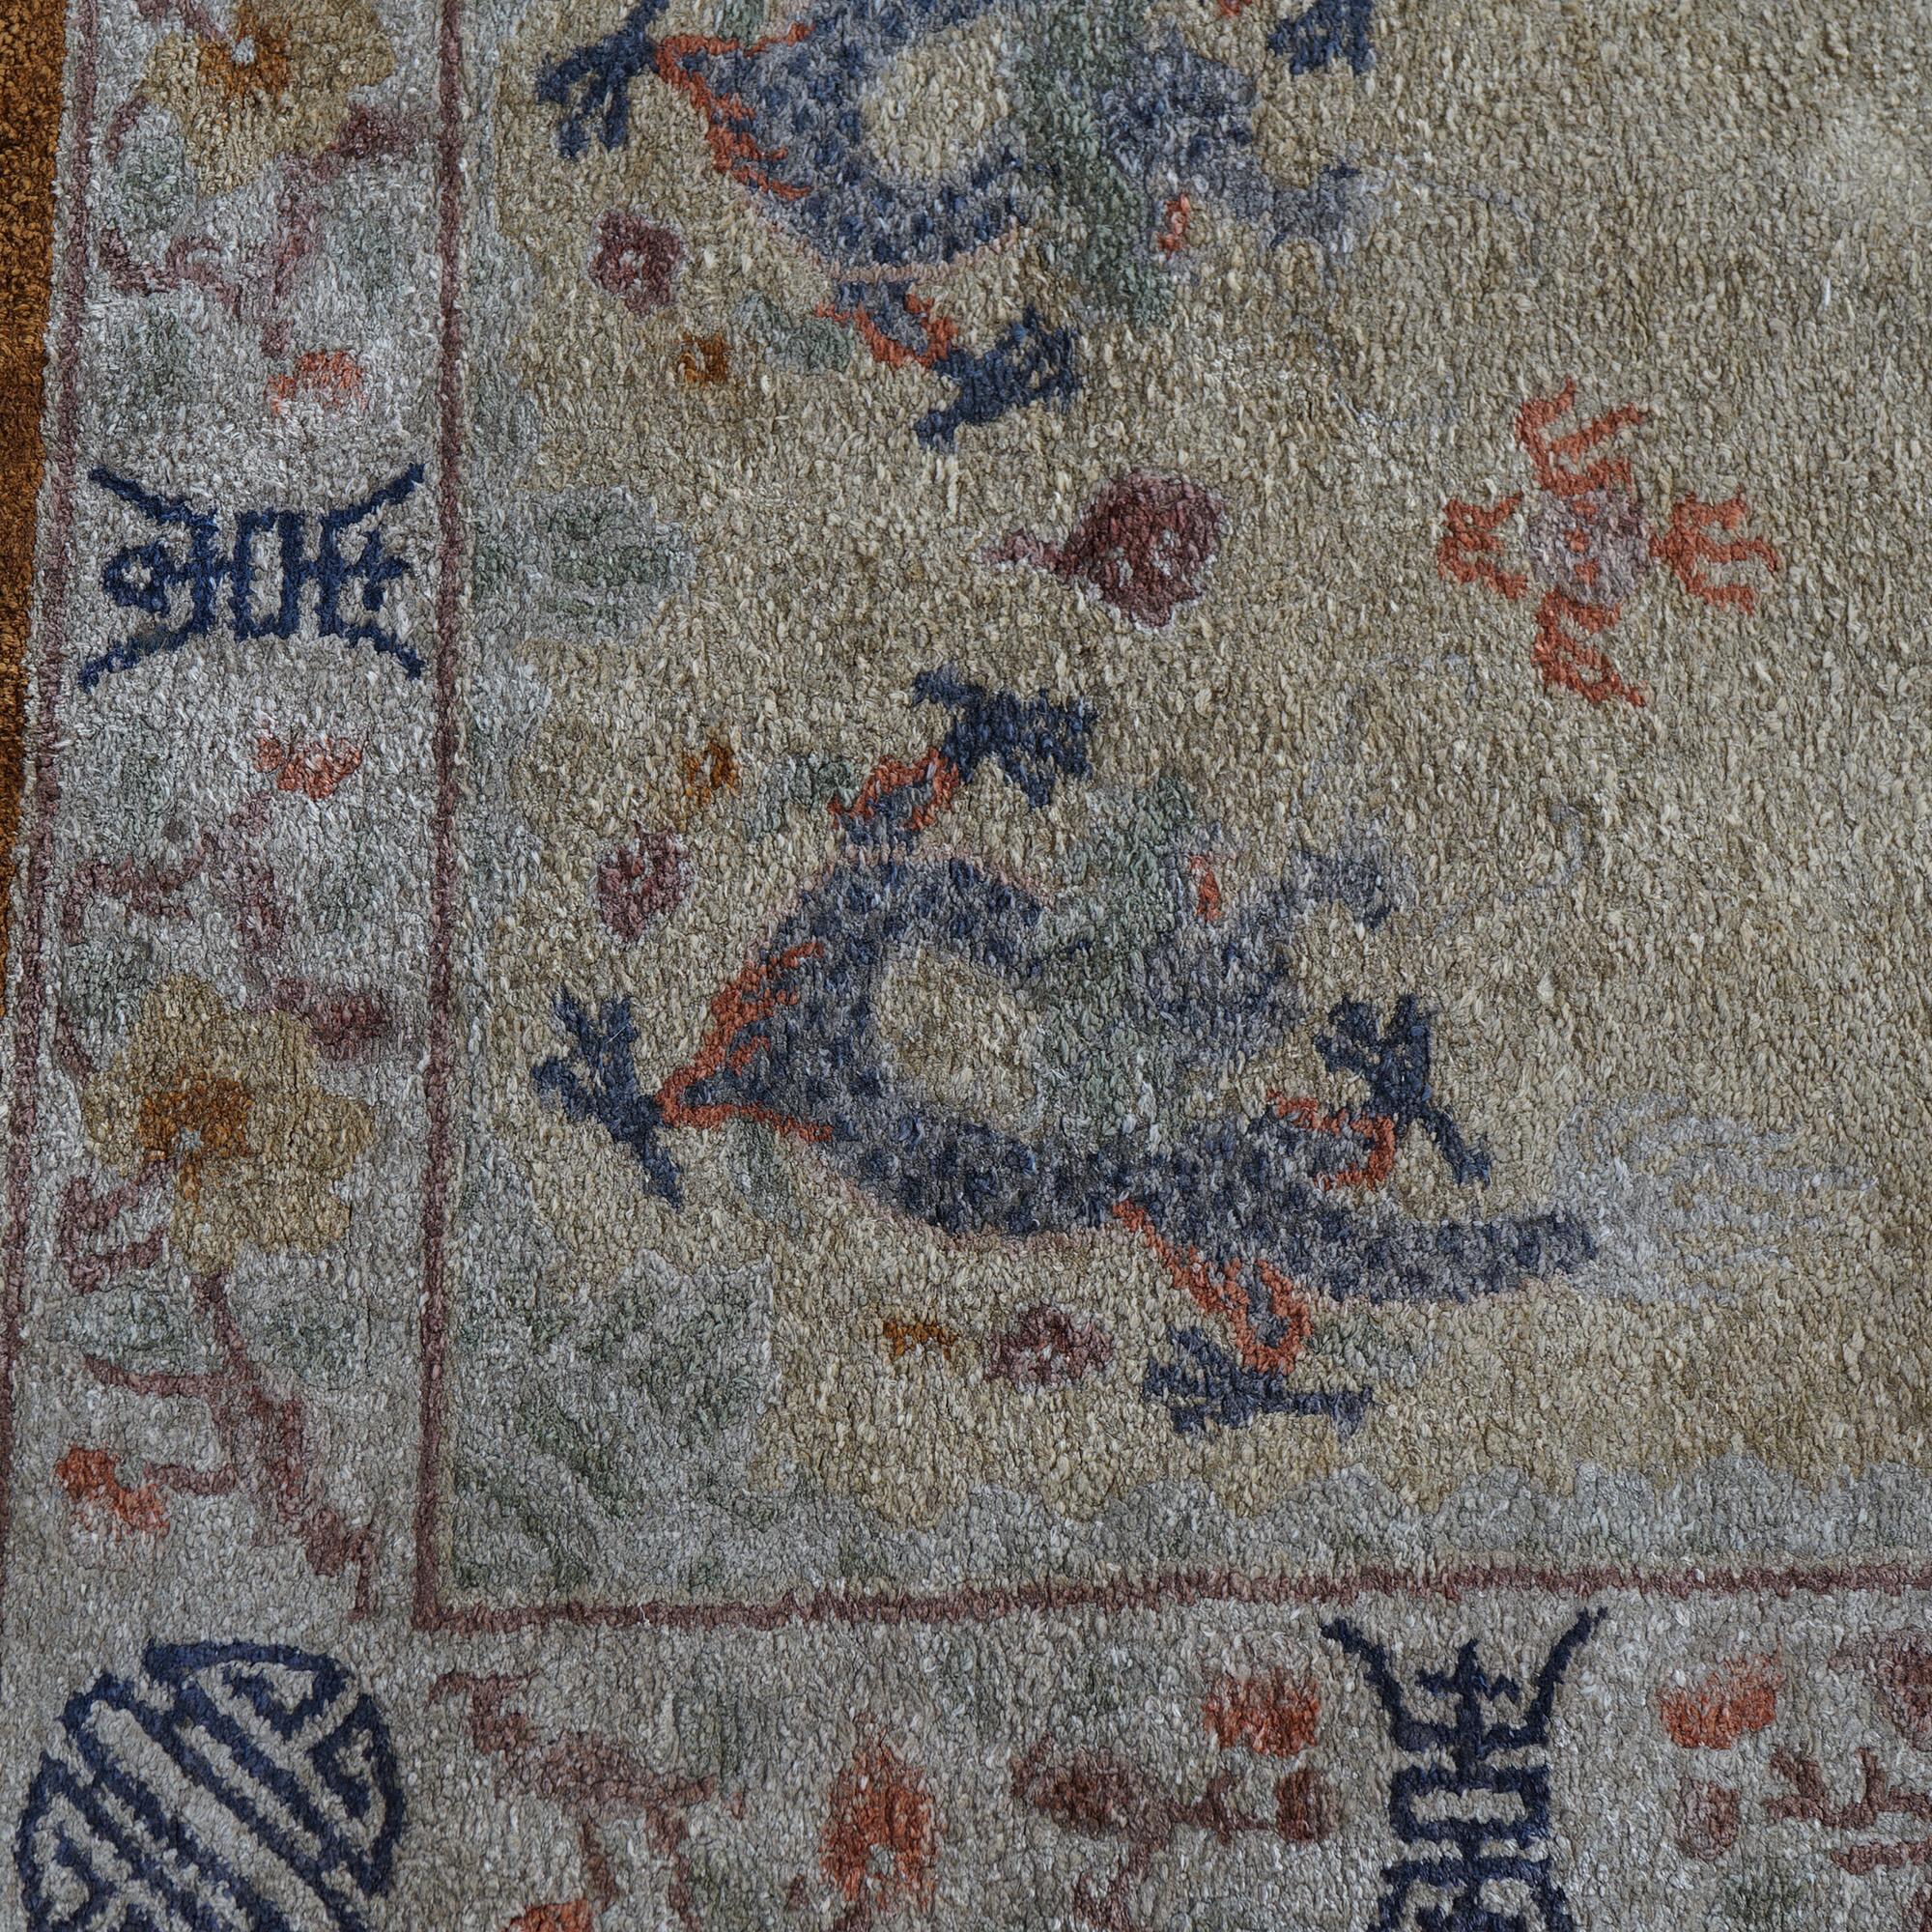 Antique Silk Chinese Oriental Rug with Dragons & Symbols Circa 1920 For Sale 3